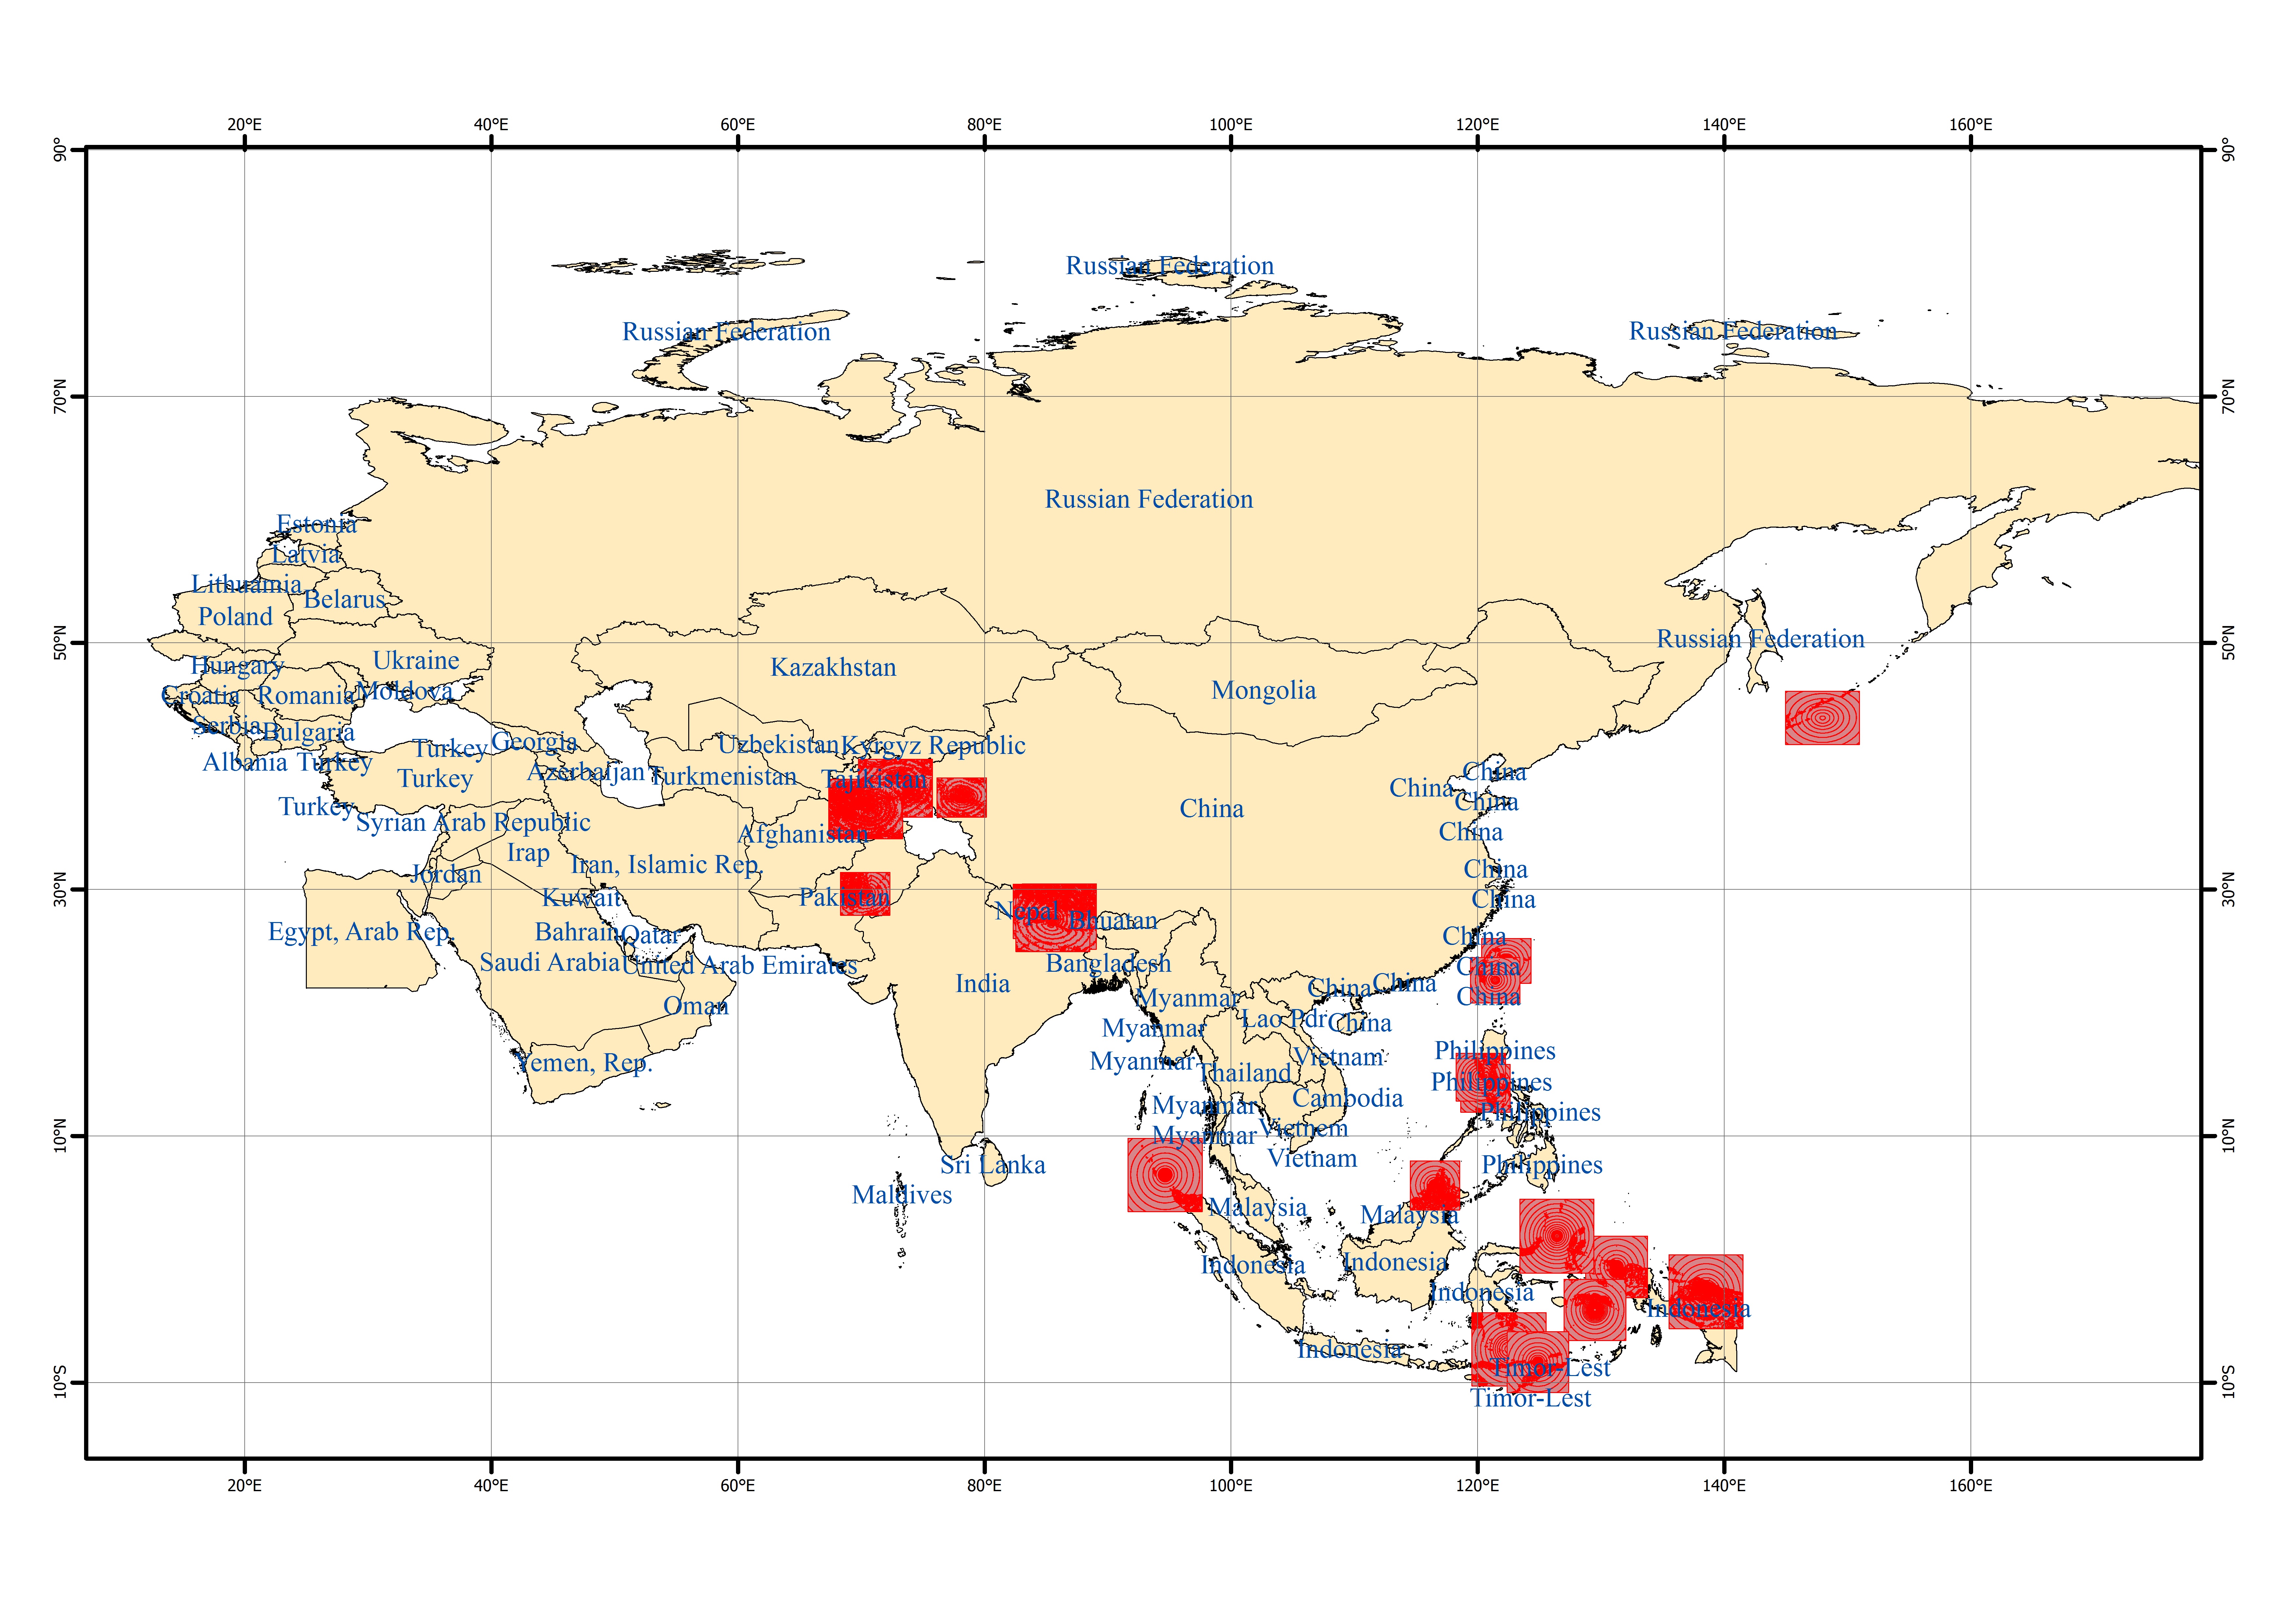 Spatio-temporal Distribution of Earthquake Disaster in the Belt and Road Area of 2015